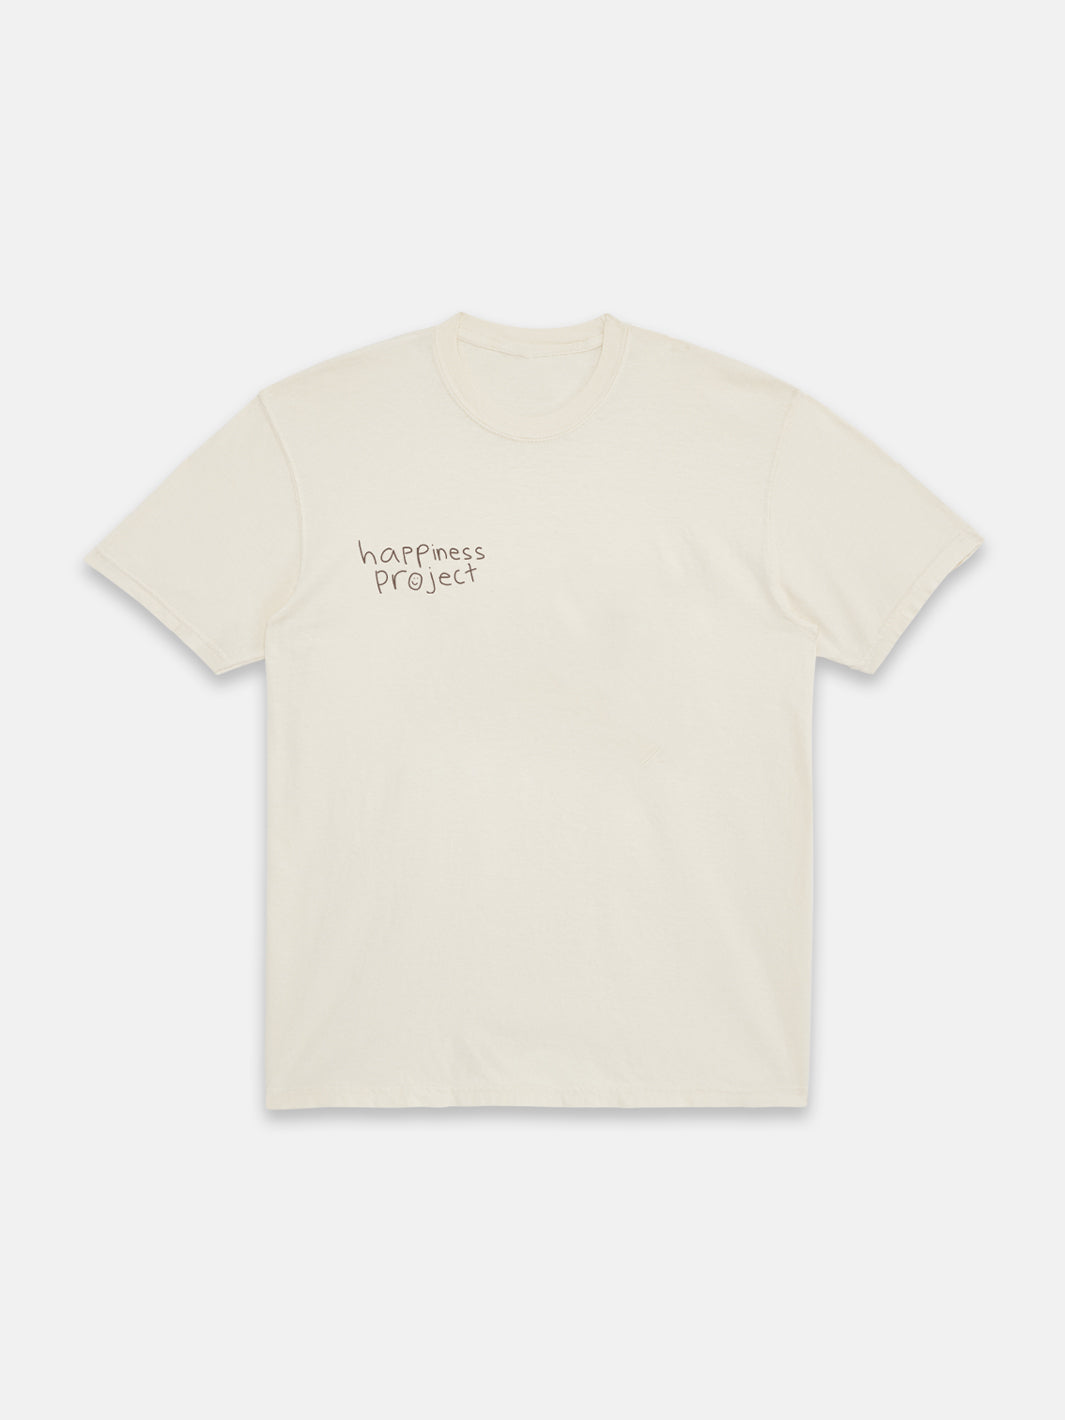 cream "not the answer" t-shirt front